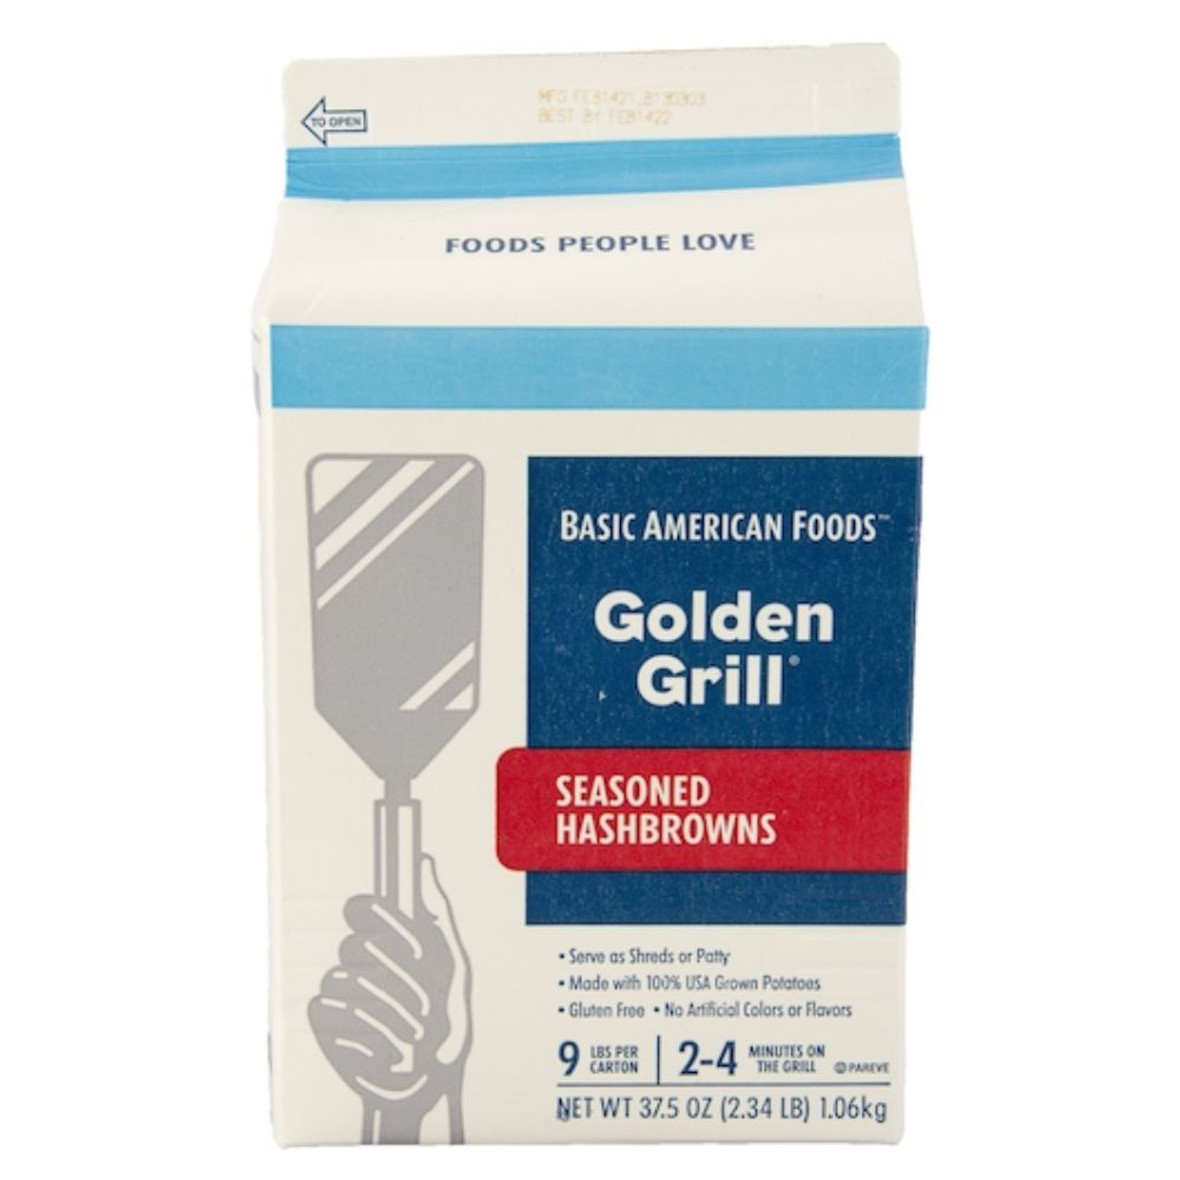 Basic American Foods Golden Grill Seasoned Hashbrowns